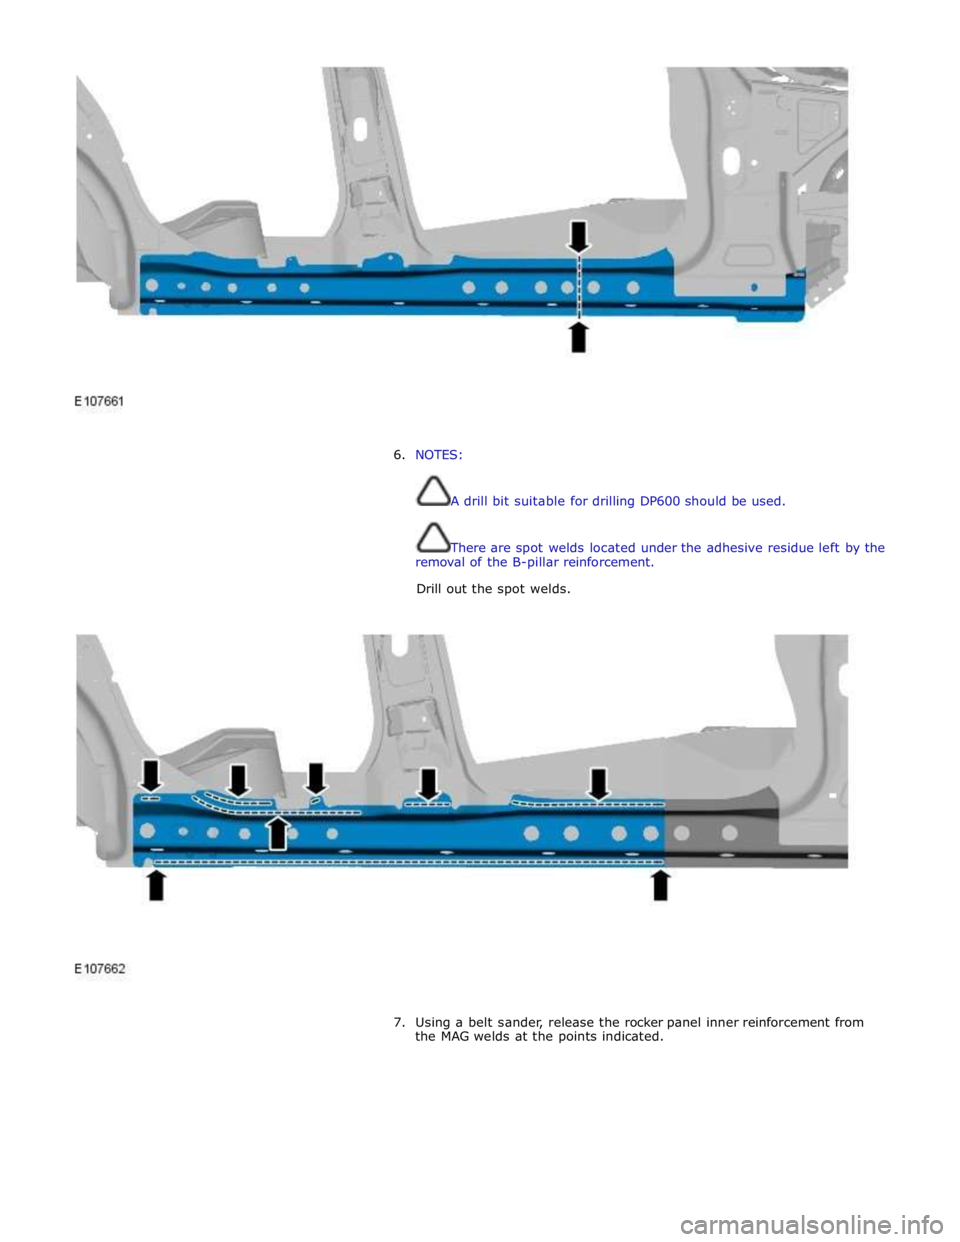 JAGUAR XFR 2010 1.G Workshop Manual  
 
 
6. NOTES: 
 
 
A drill bit suitable for drilling DP600 should be used. 
 
 
There are spot welds located under the adhesive residue left by the 
removal of the B-pillar reinforcement. 
Drill out